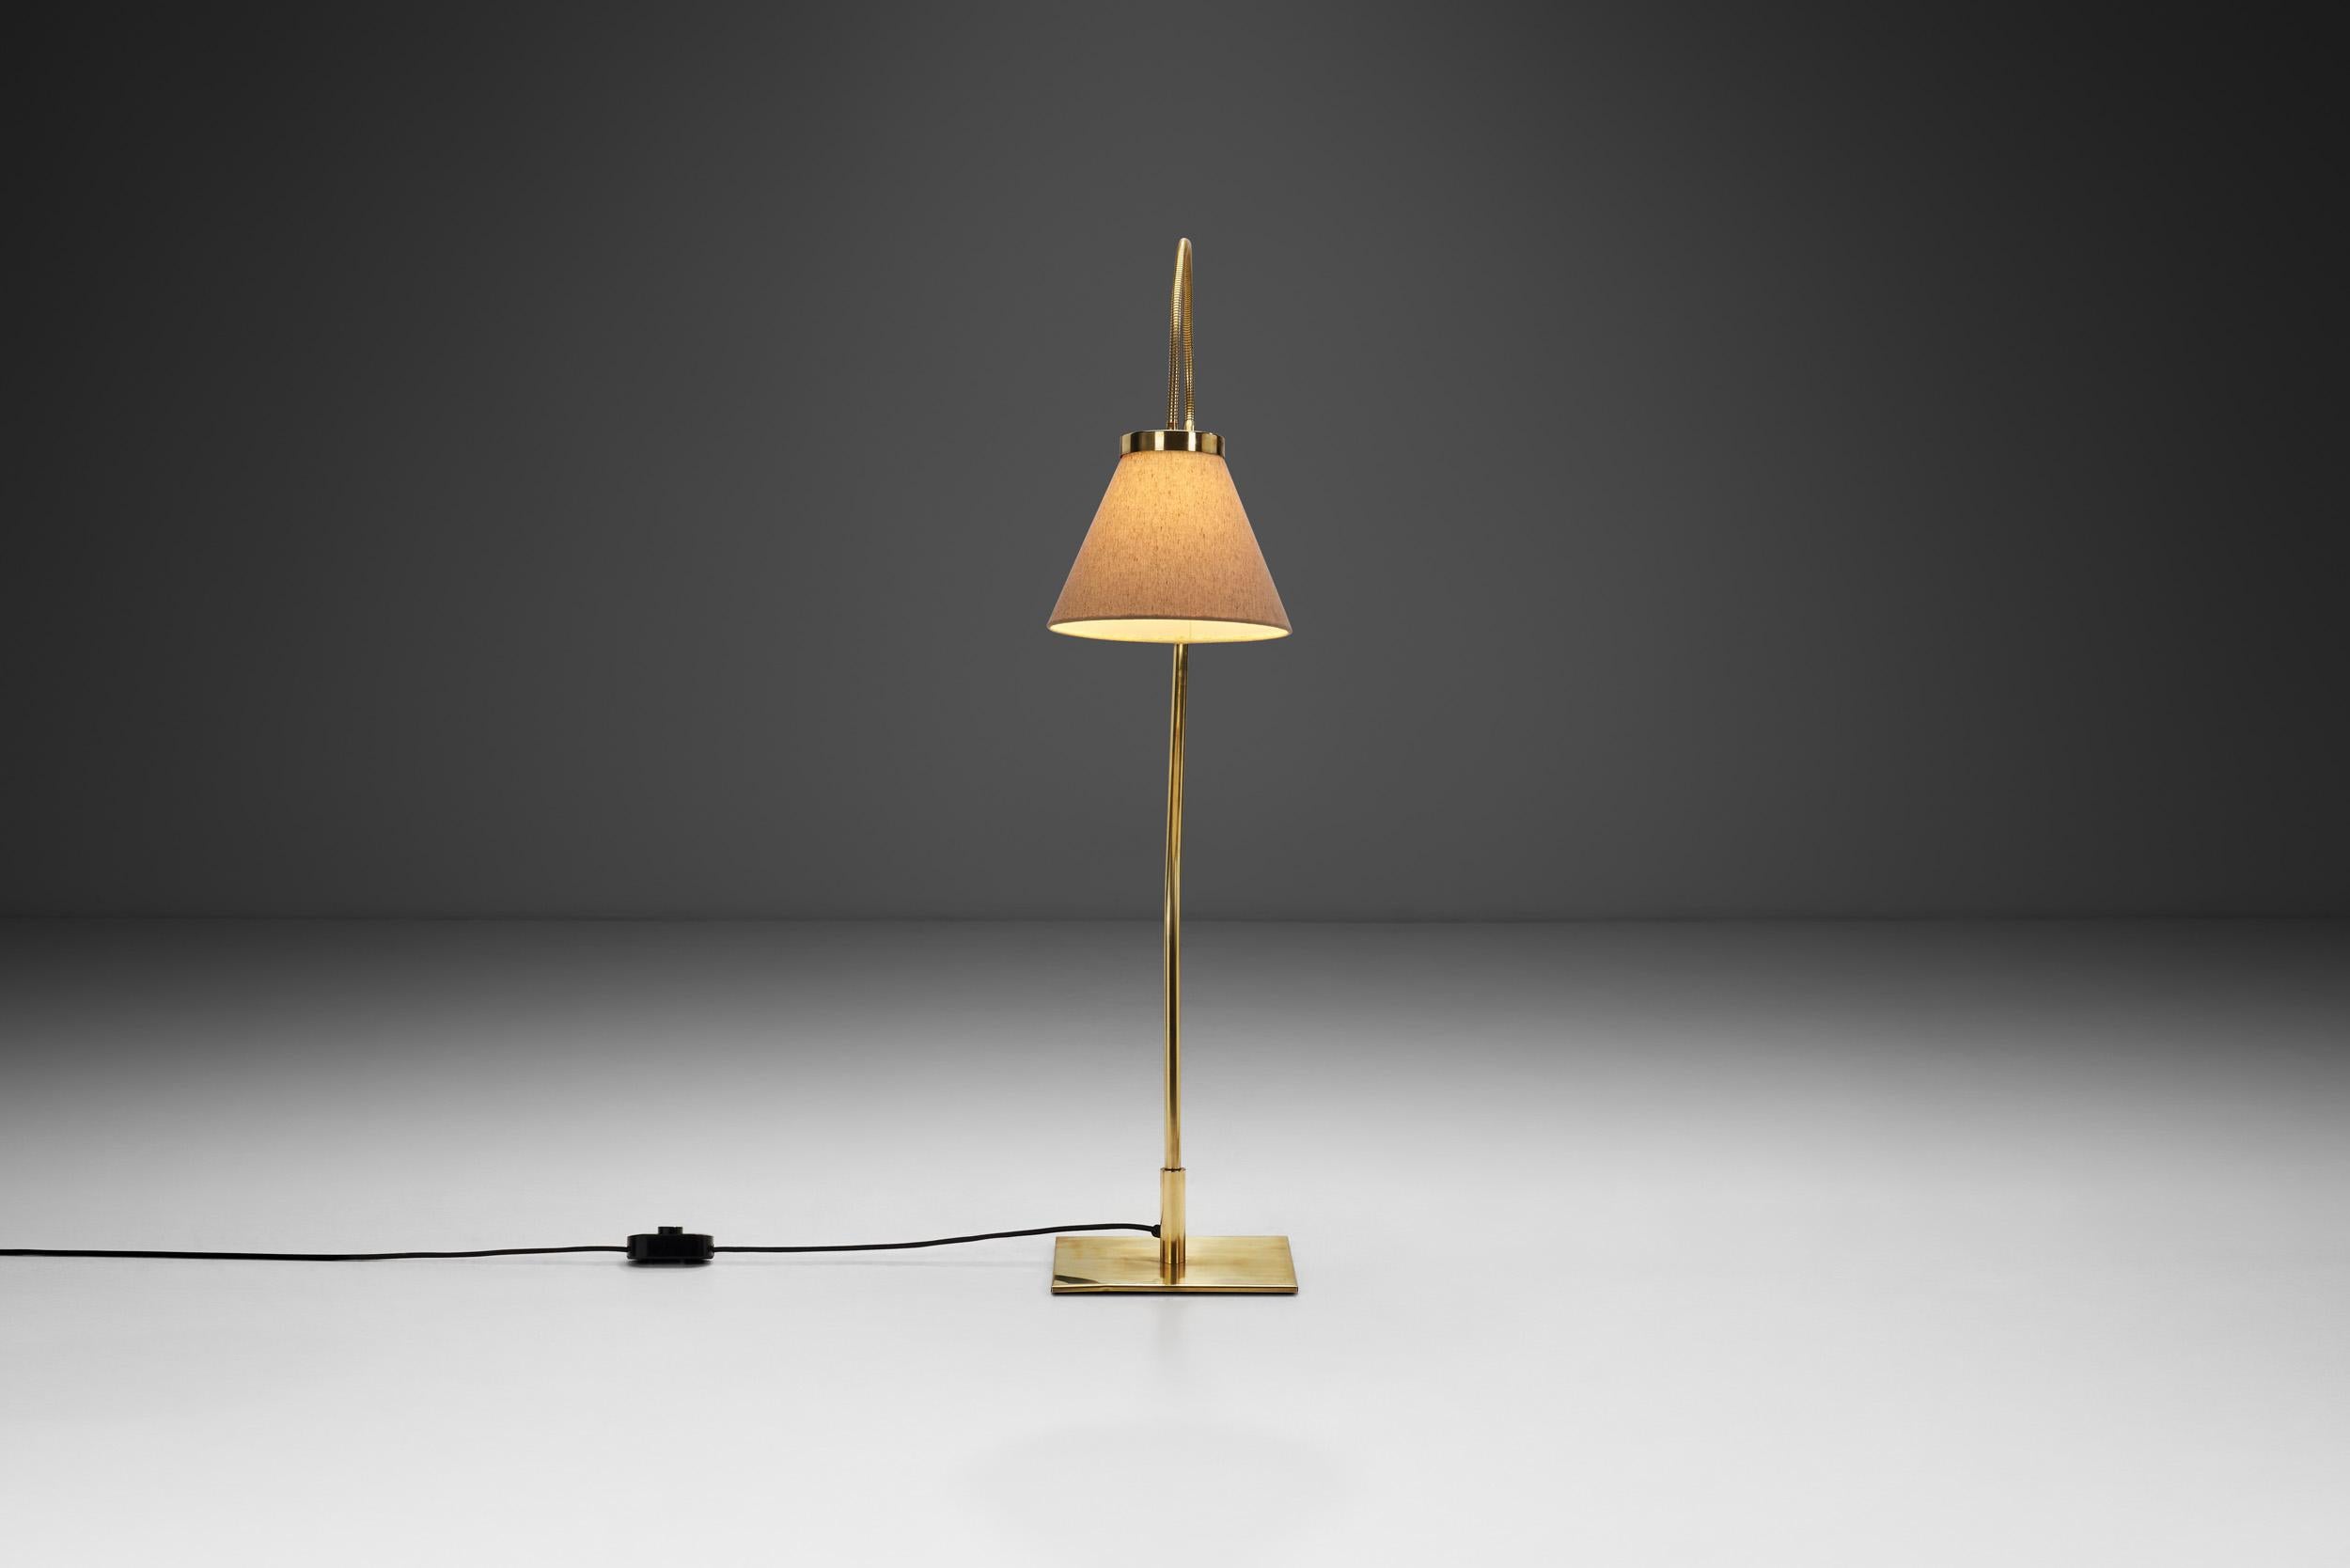 Mid-20th Century Brass Floor Lamp with Adjustable Gooseneck for Bergboms, Sweden 1940s For Sale